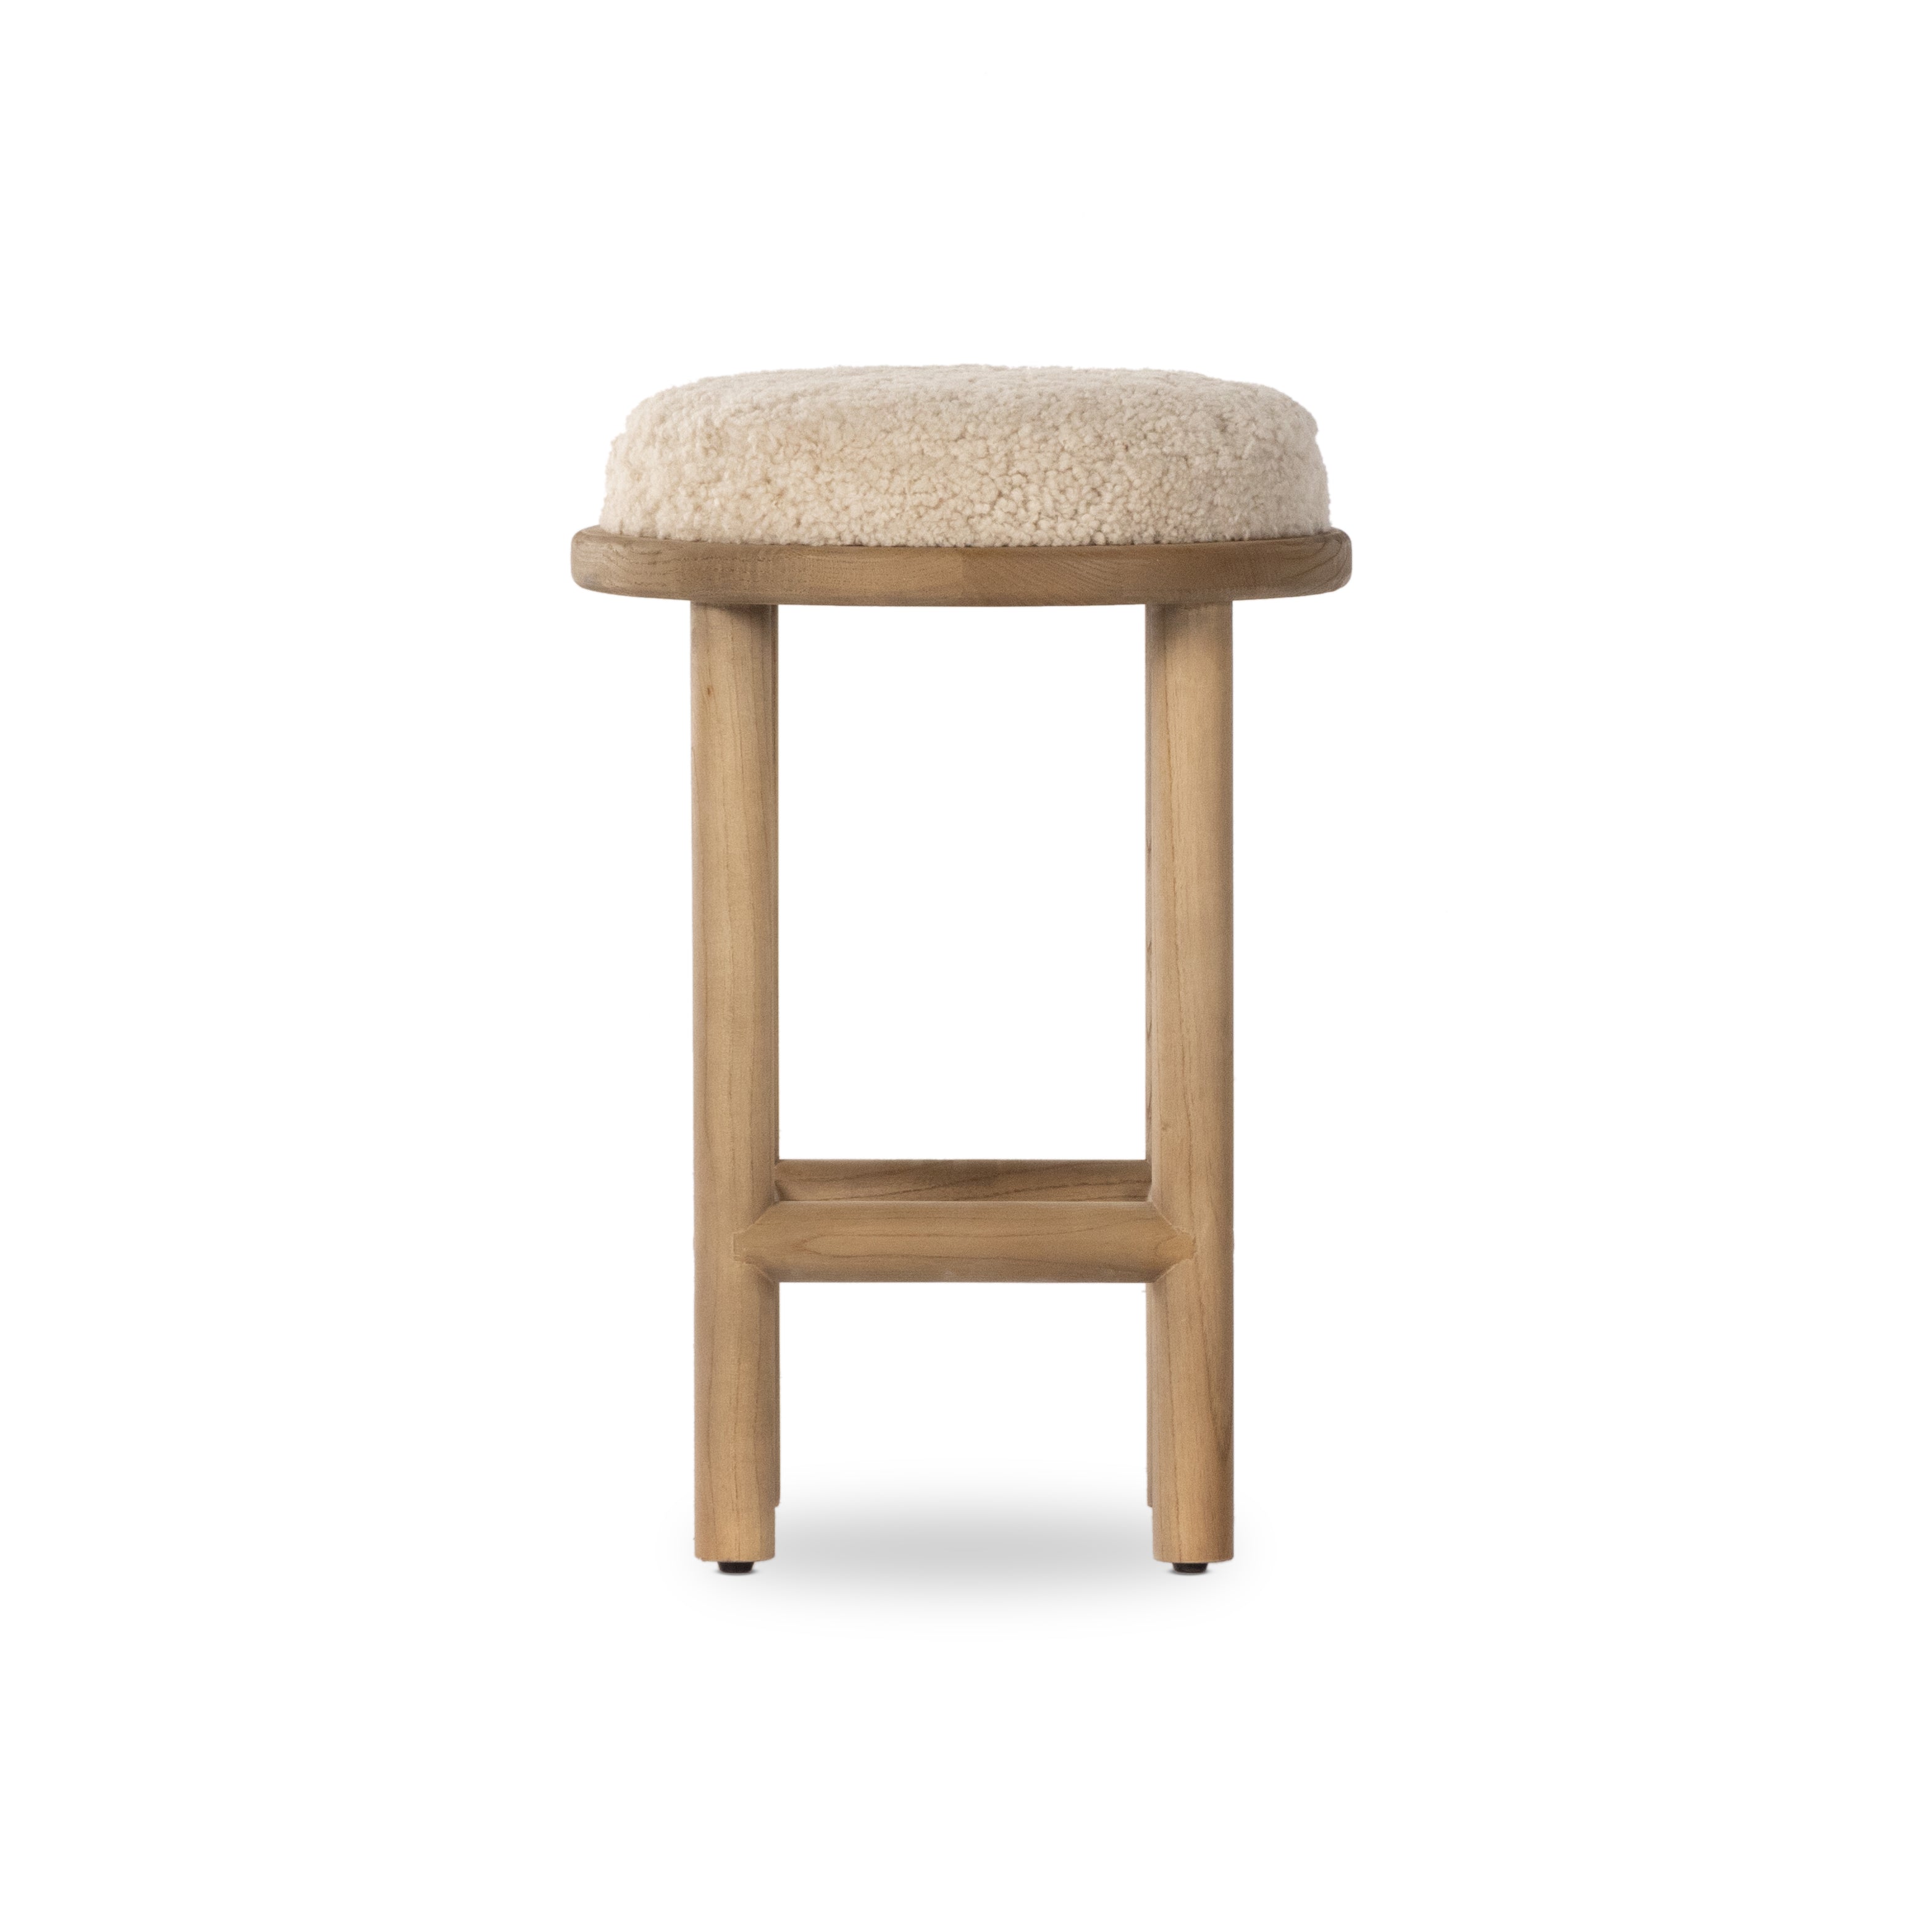 Bring a textural touch to the counter with the Saldino stool. Blonde-finished solid parawood supports rounded seating of soft beige shearling for comfort and style alike. Amethyst Home provides interior design, new home construction design consulting, vintage area rugs, and lighting in the Houston metro area.